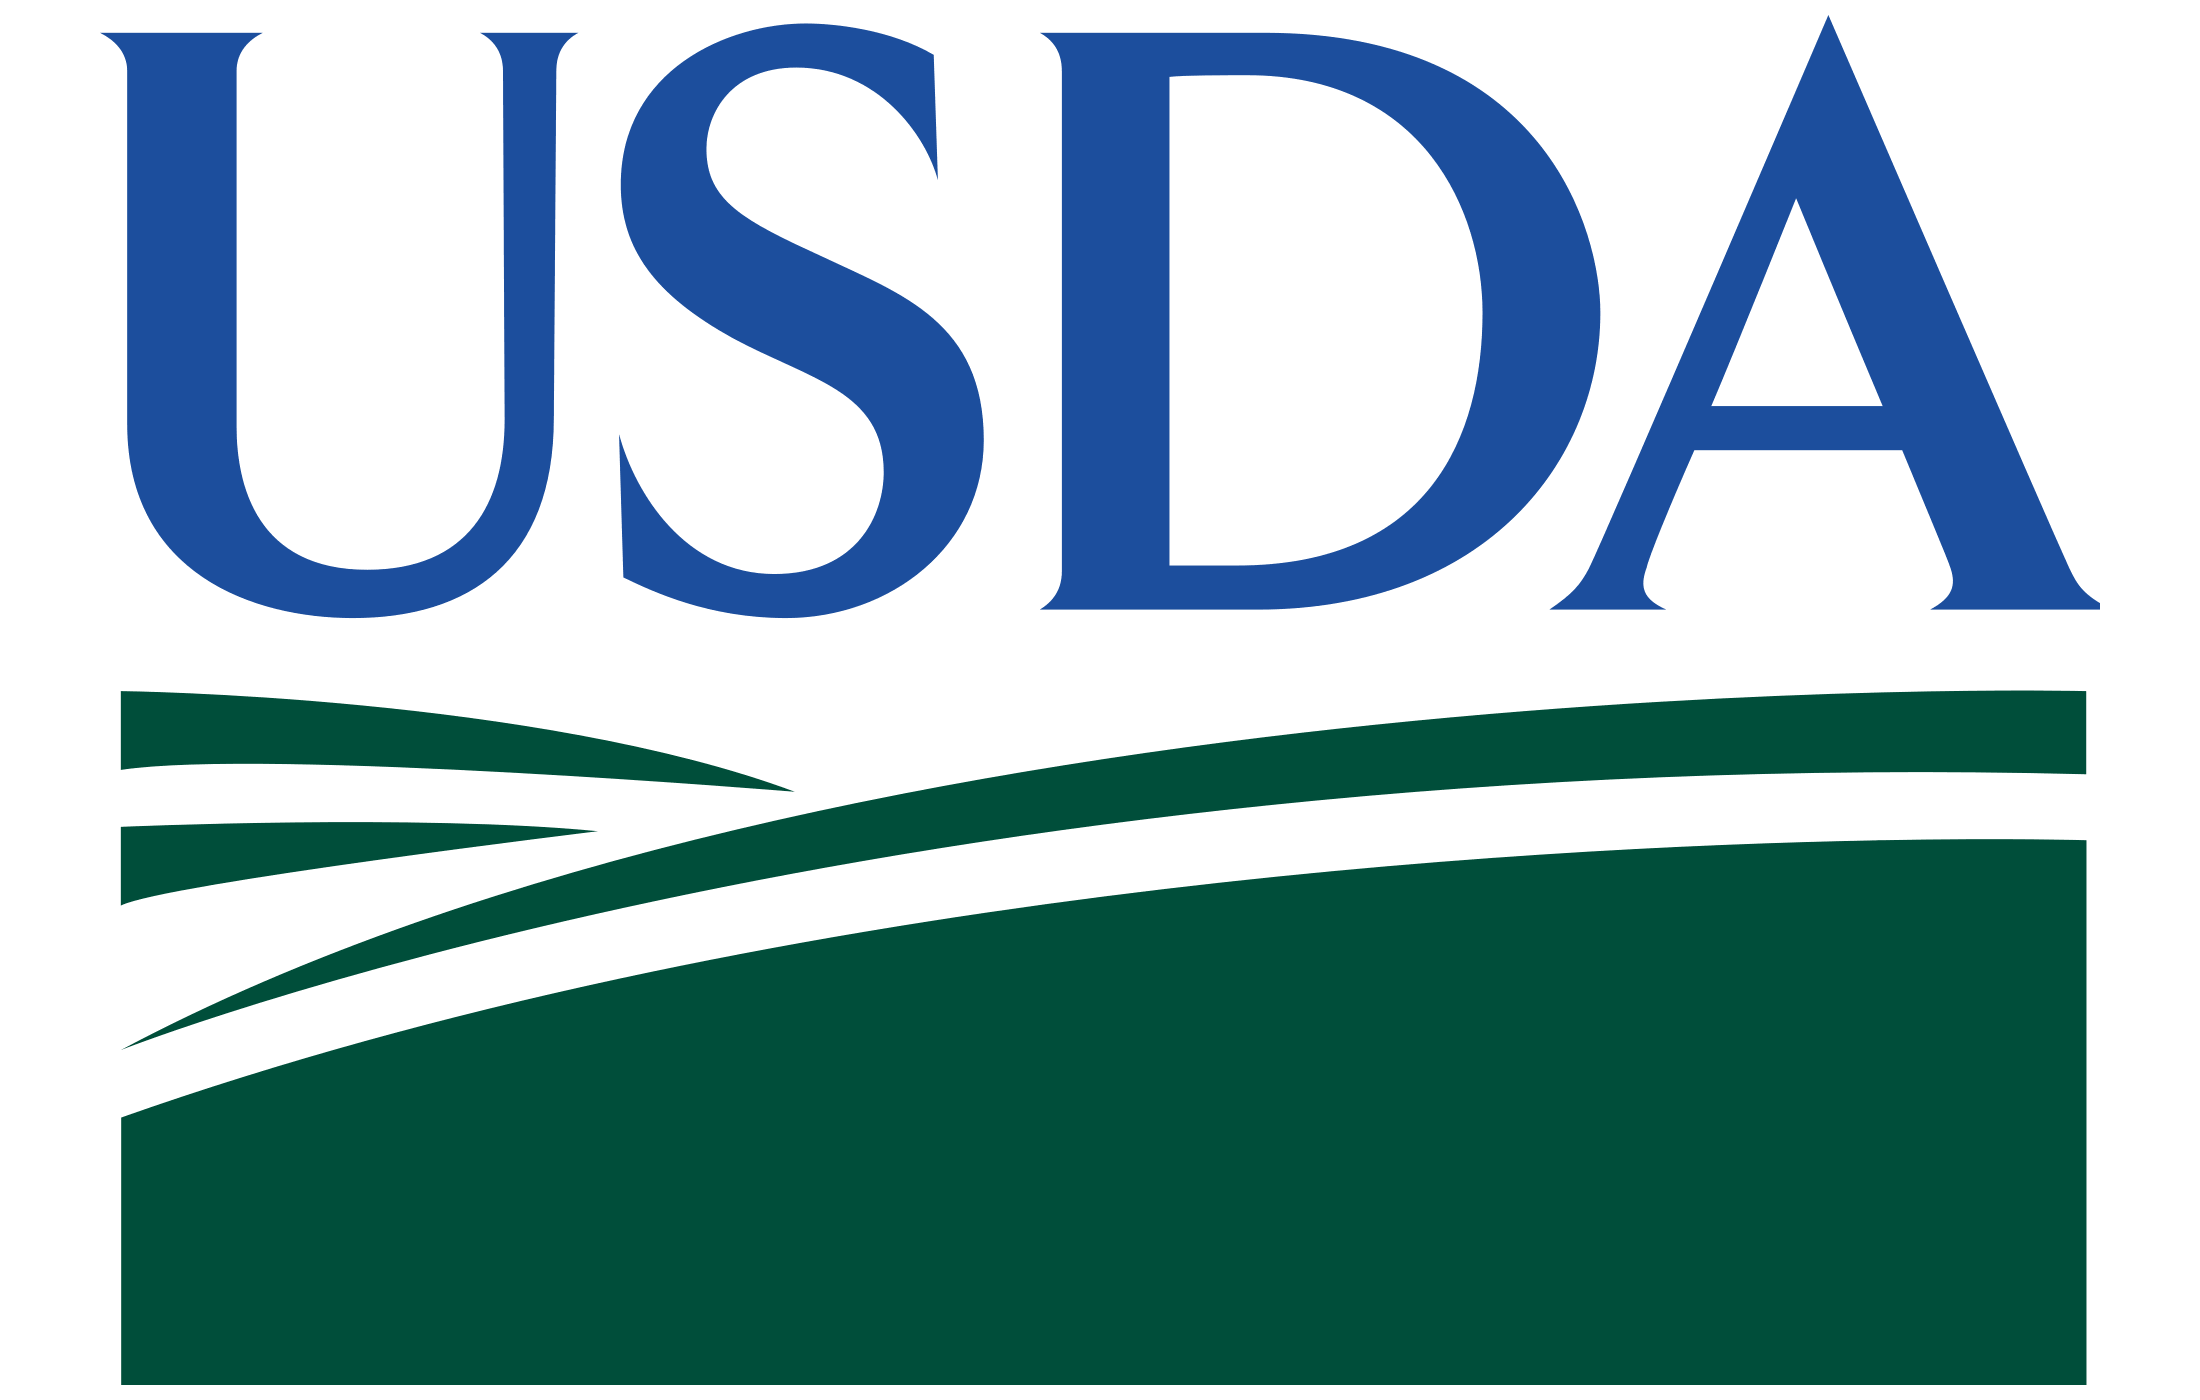 United States Department of Agriculture (USDA) Scholarship programs